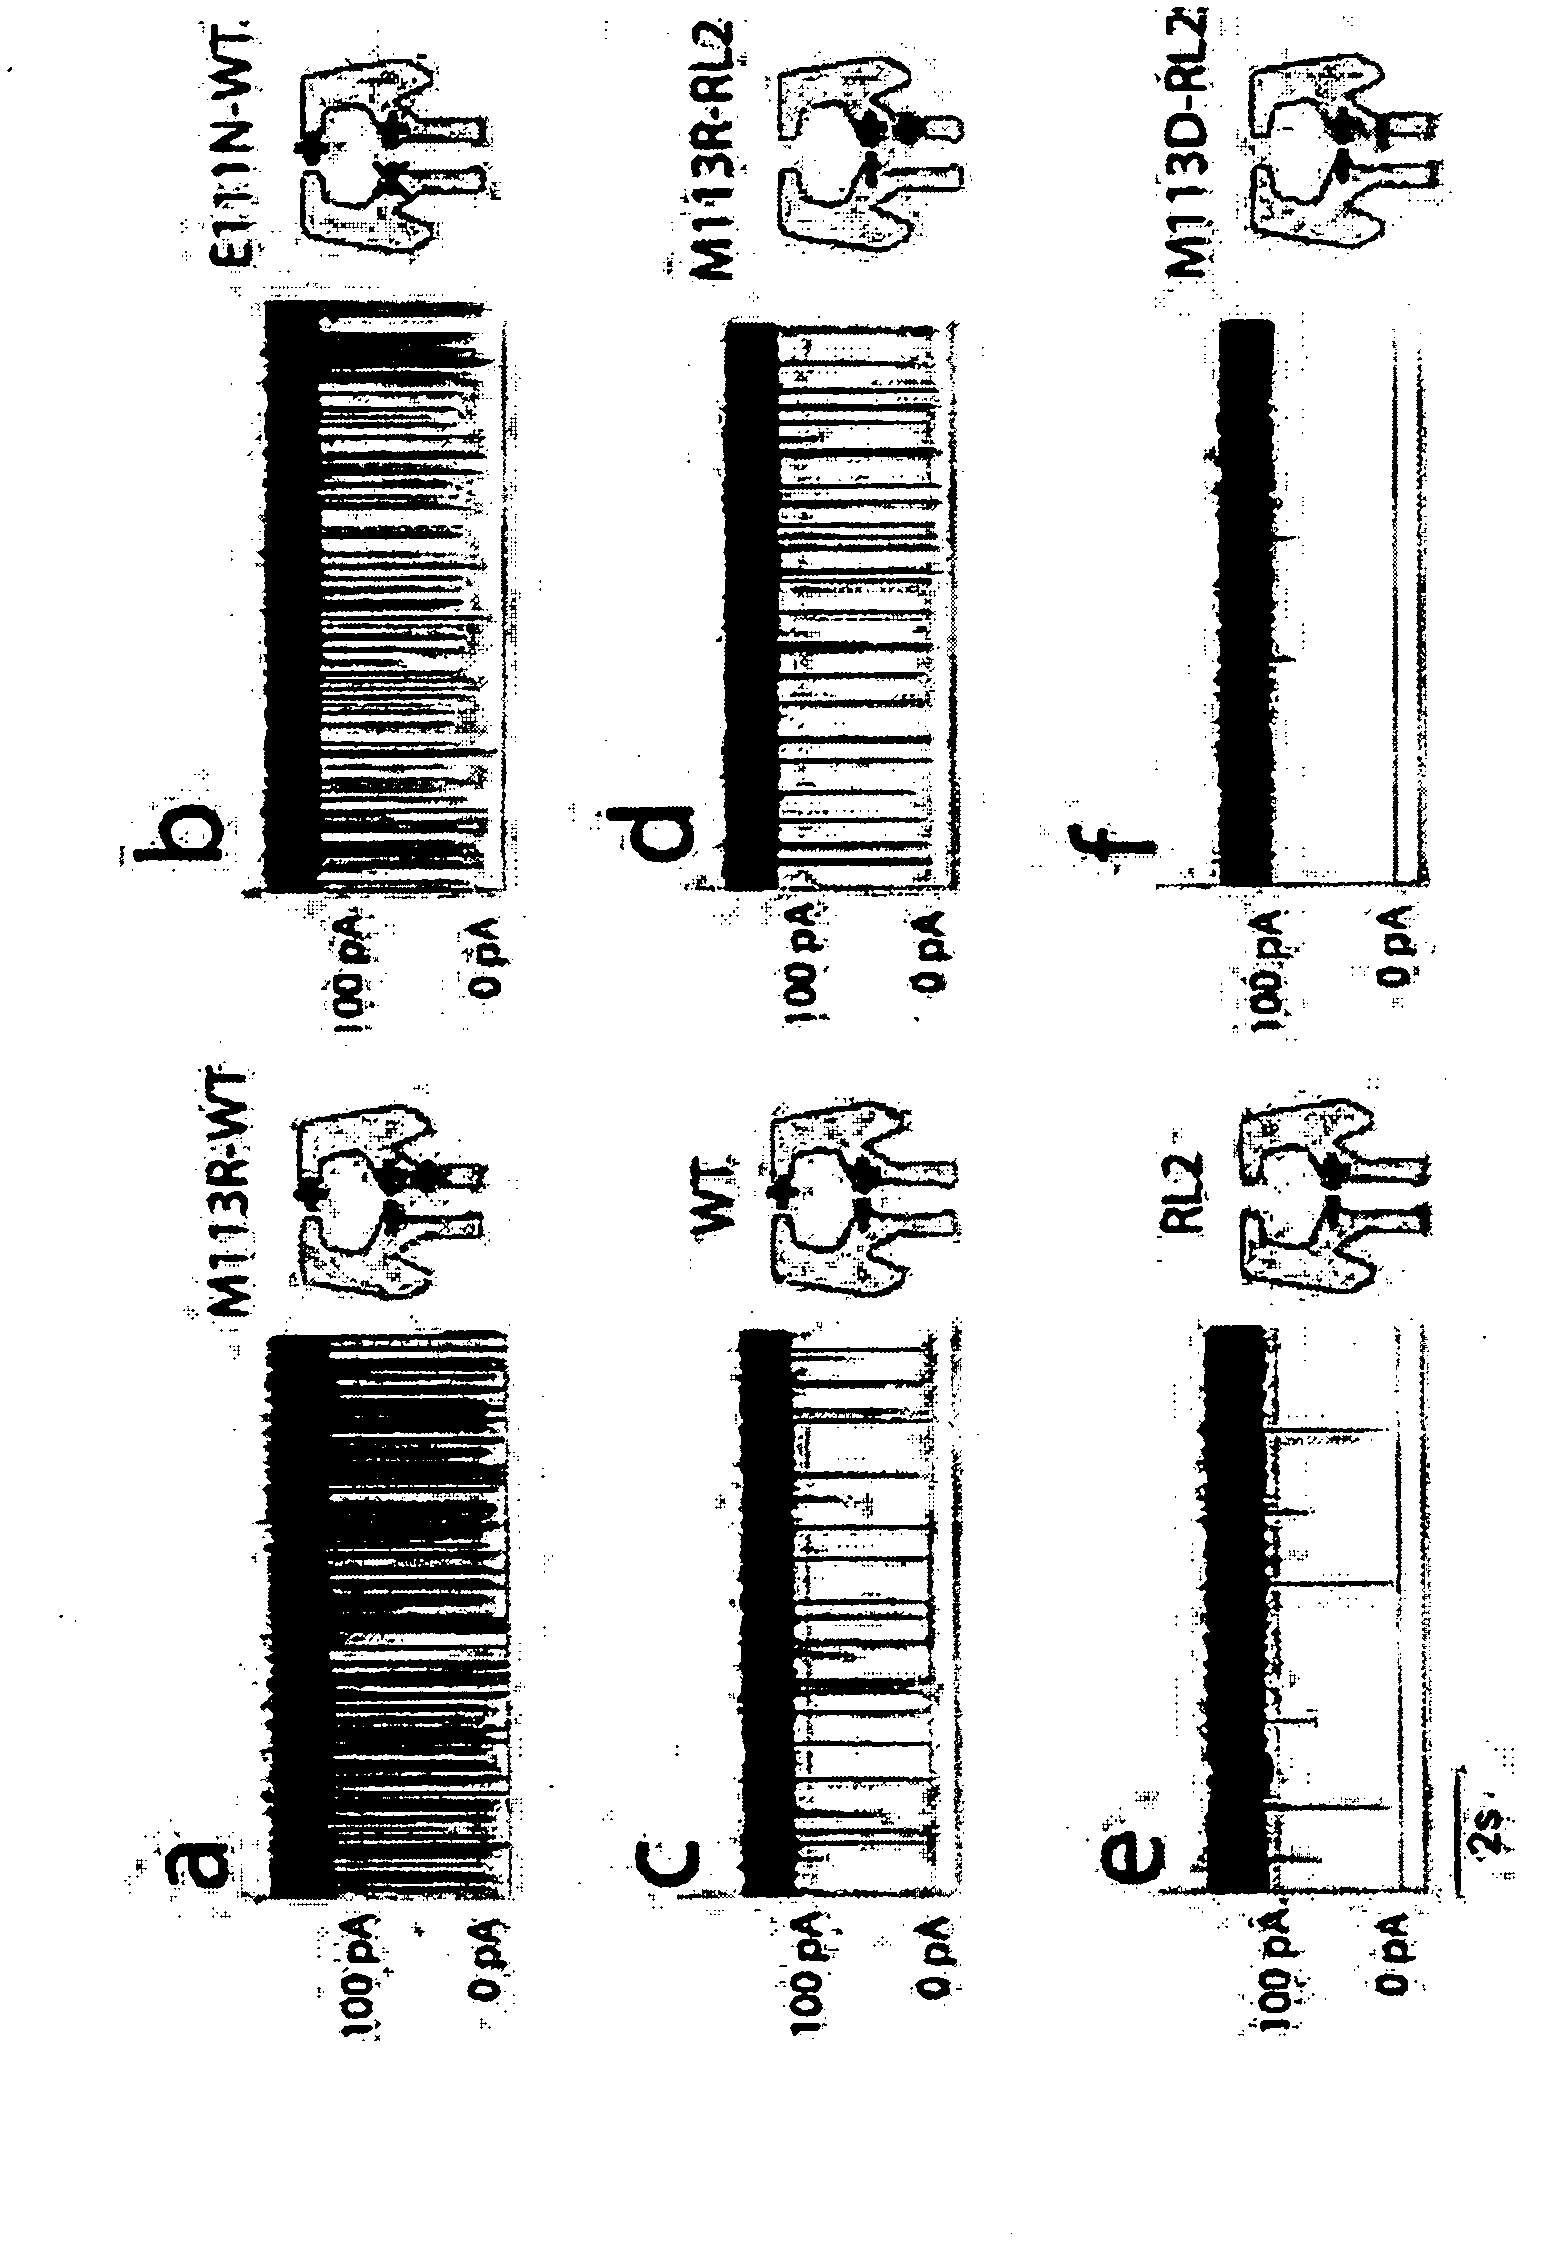 Methods of enhancing translocation of charged analytes through transmembrane protein pores